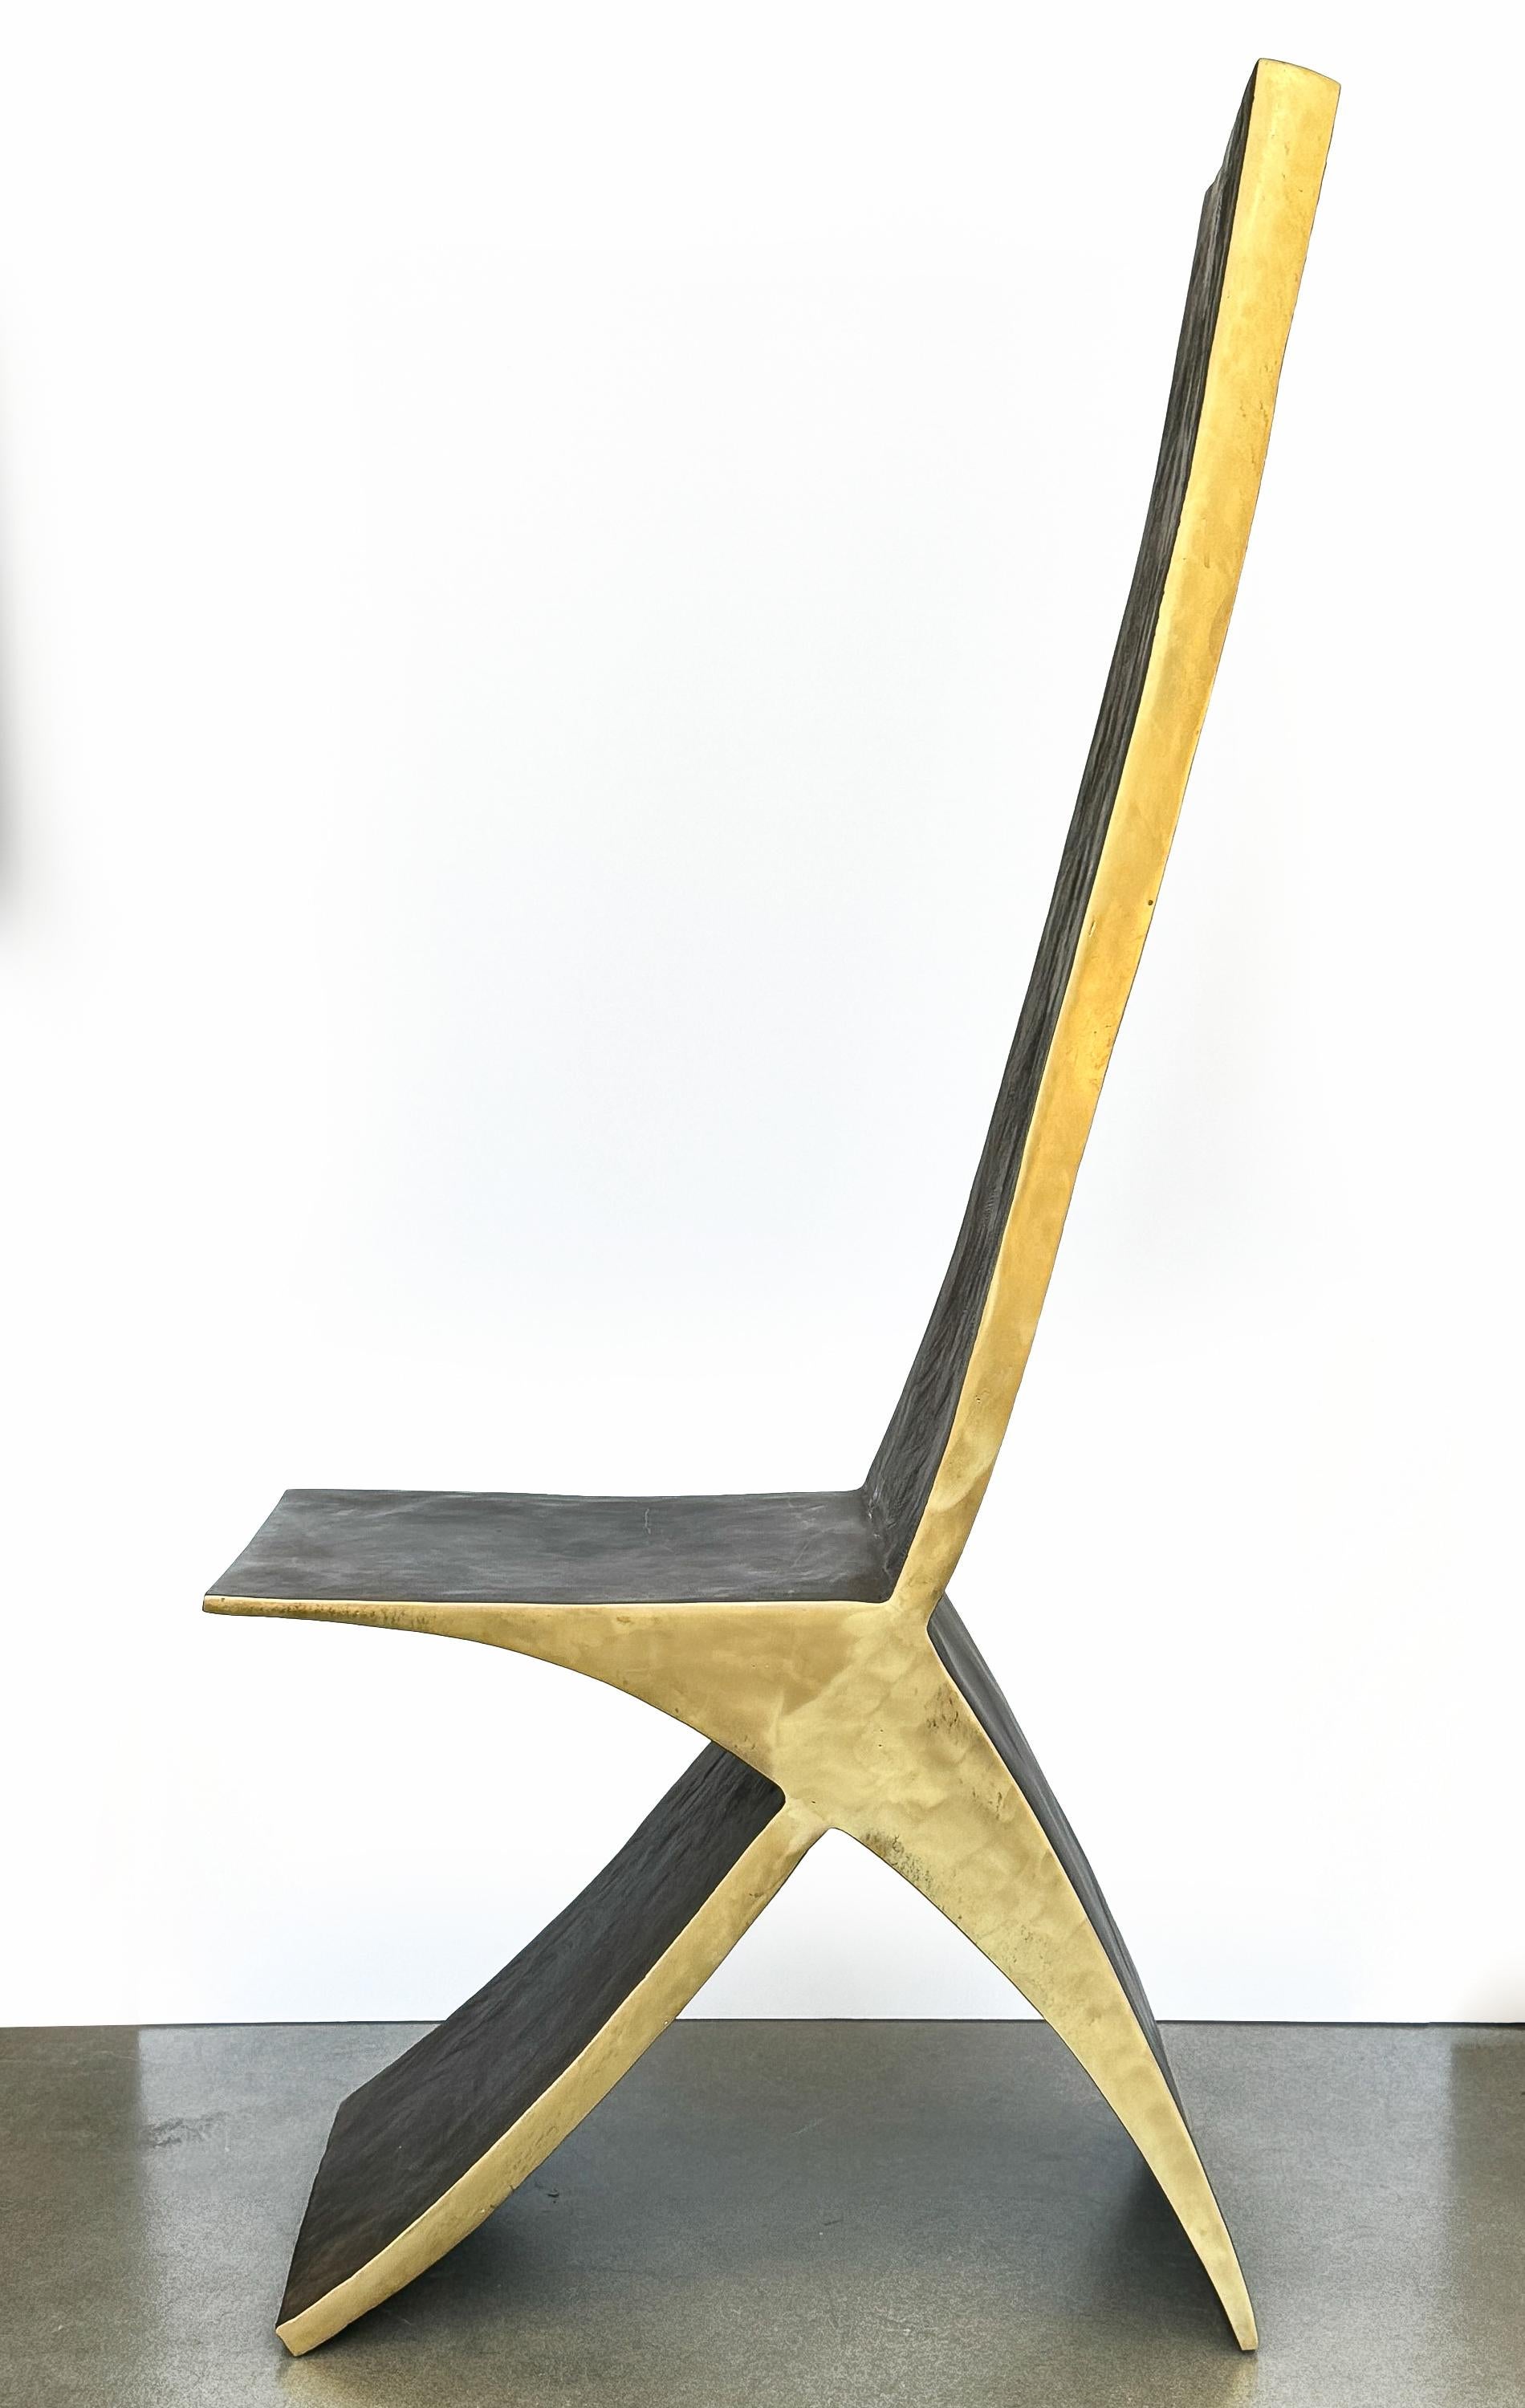 Sculptural Bronze Chair by James Vilona In Good Condition For Sale In Chicago, IL